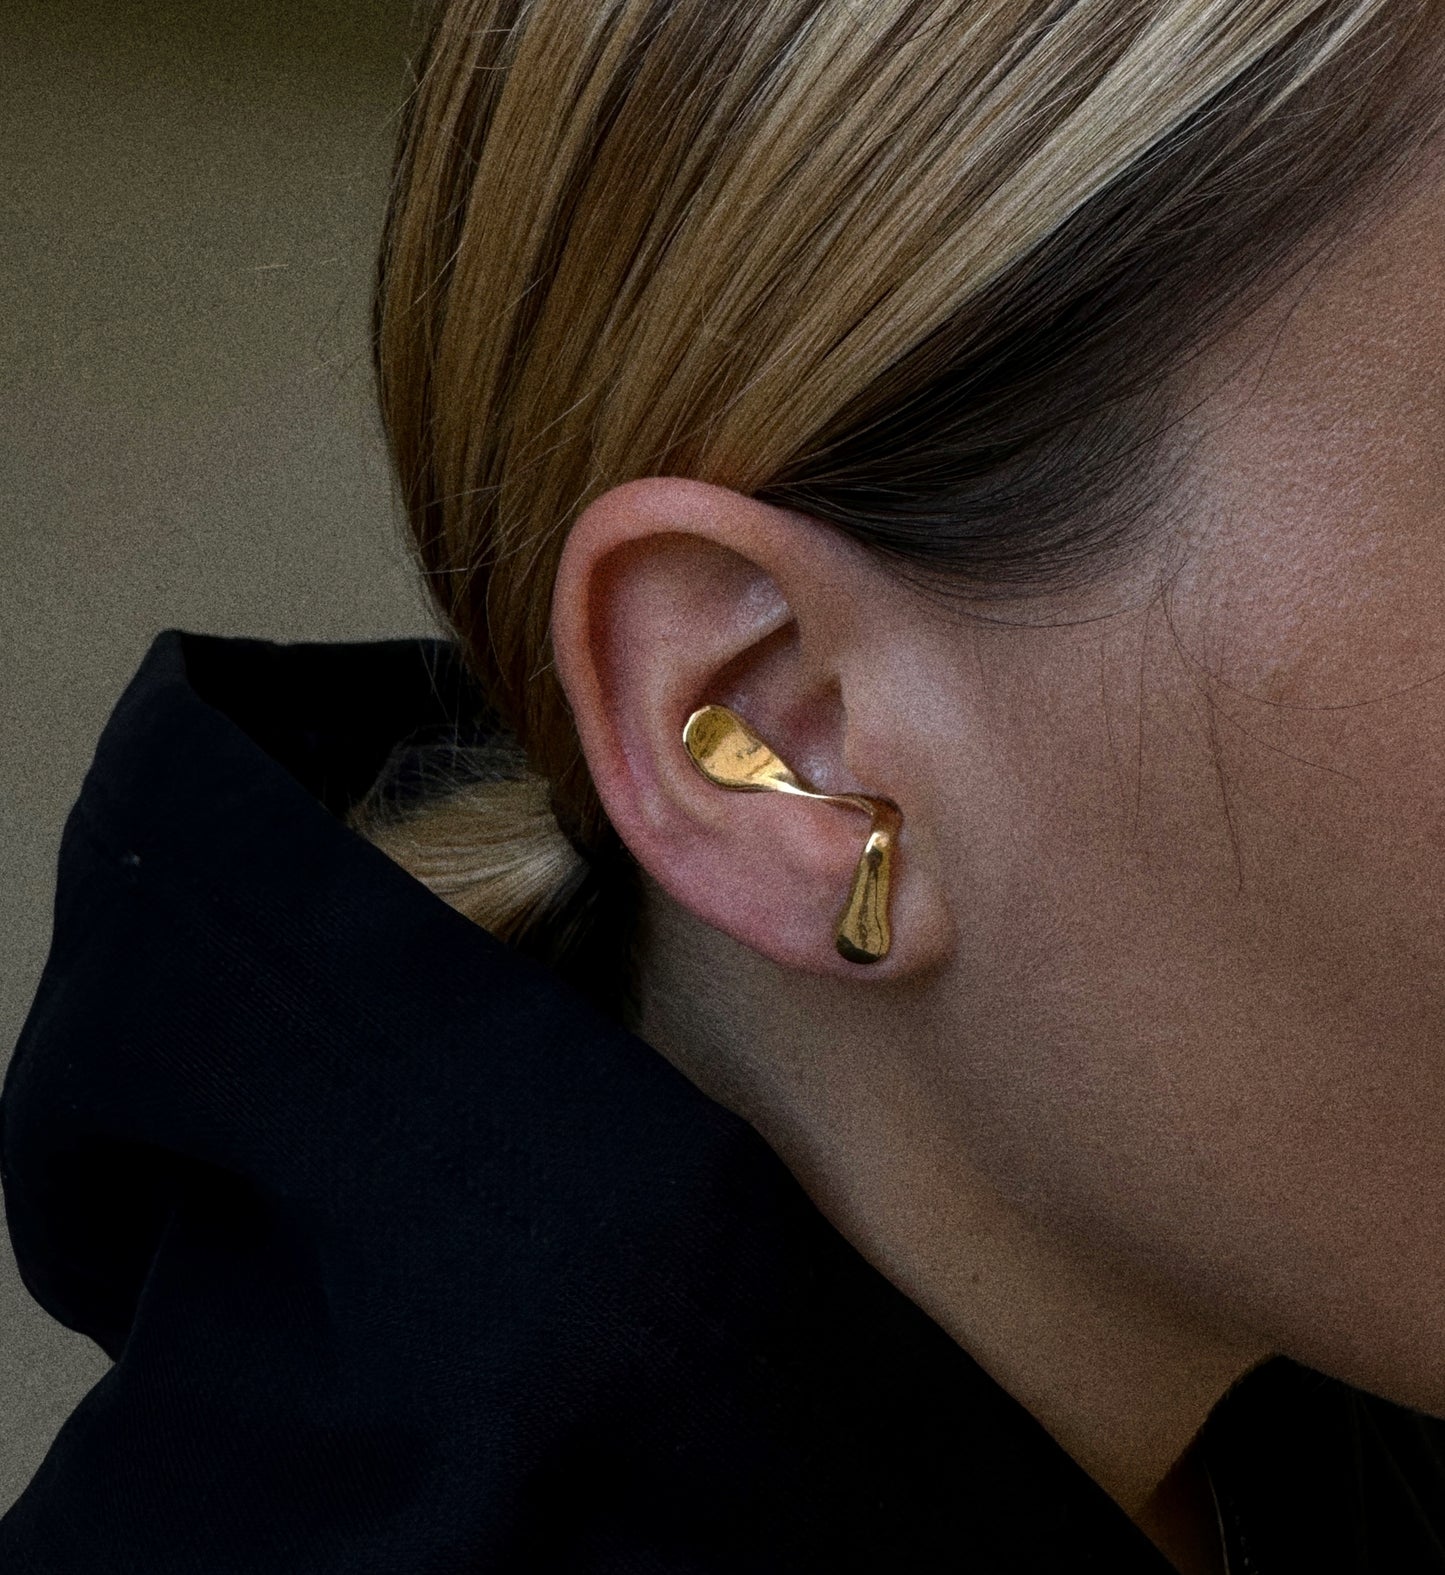 The melted ear piece Gold plated